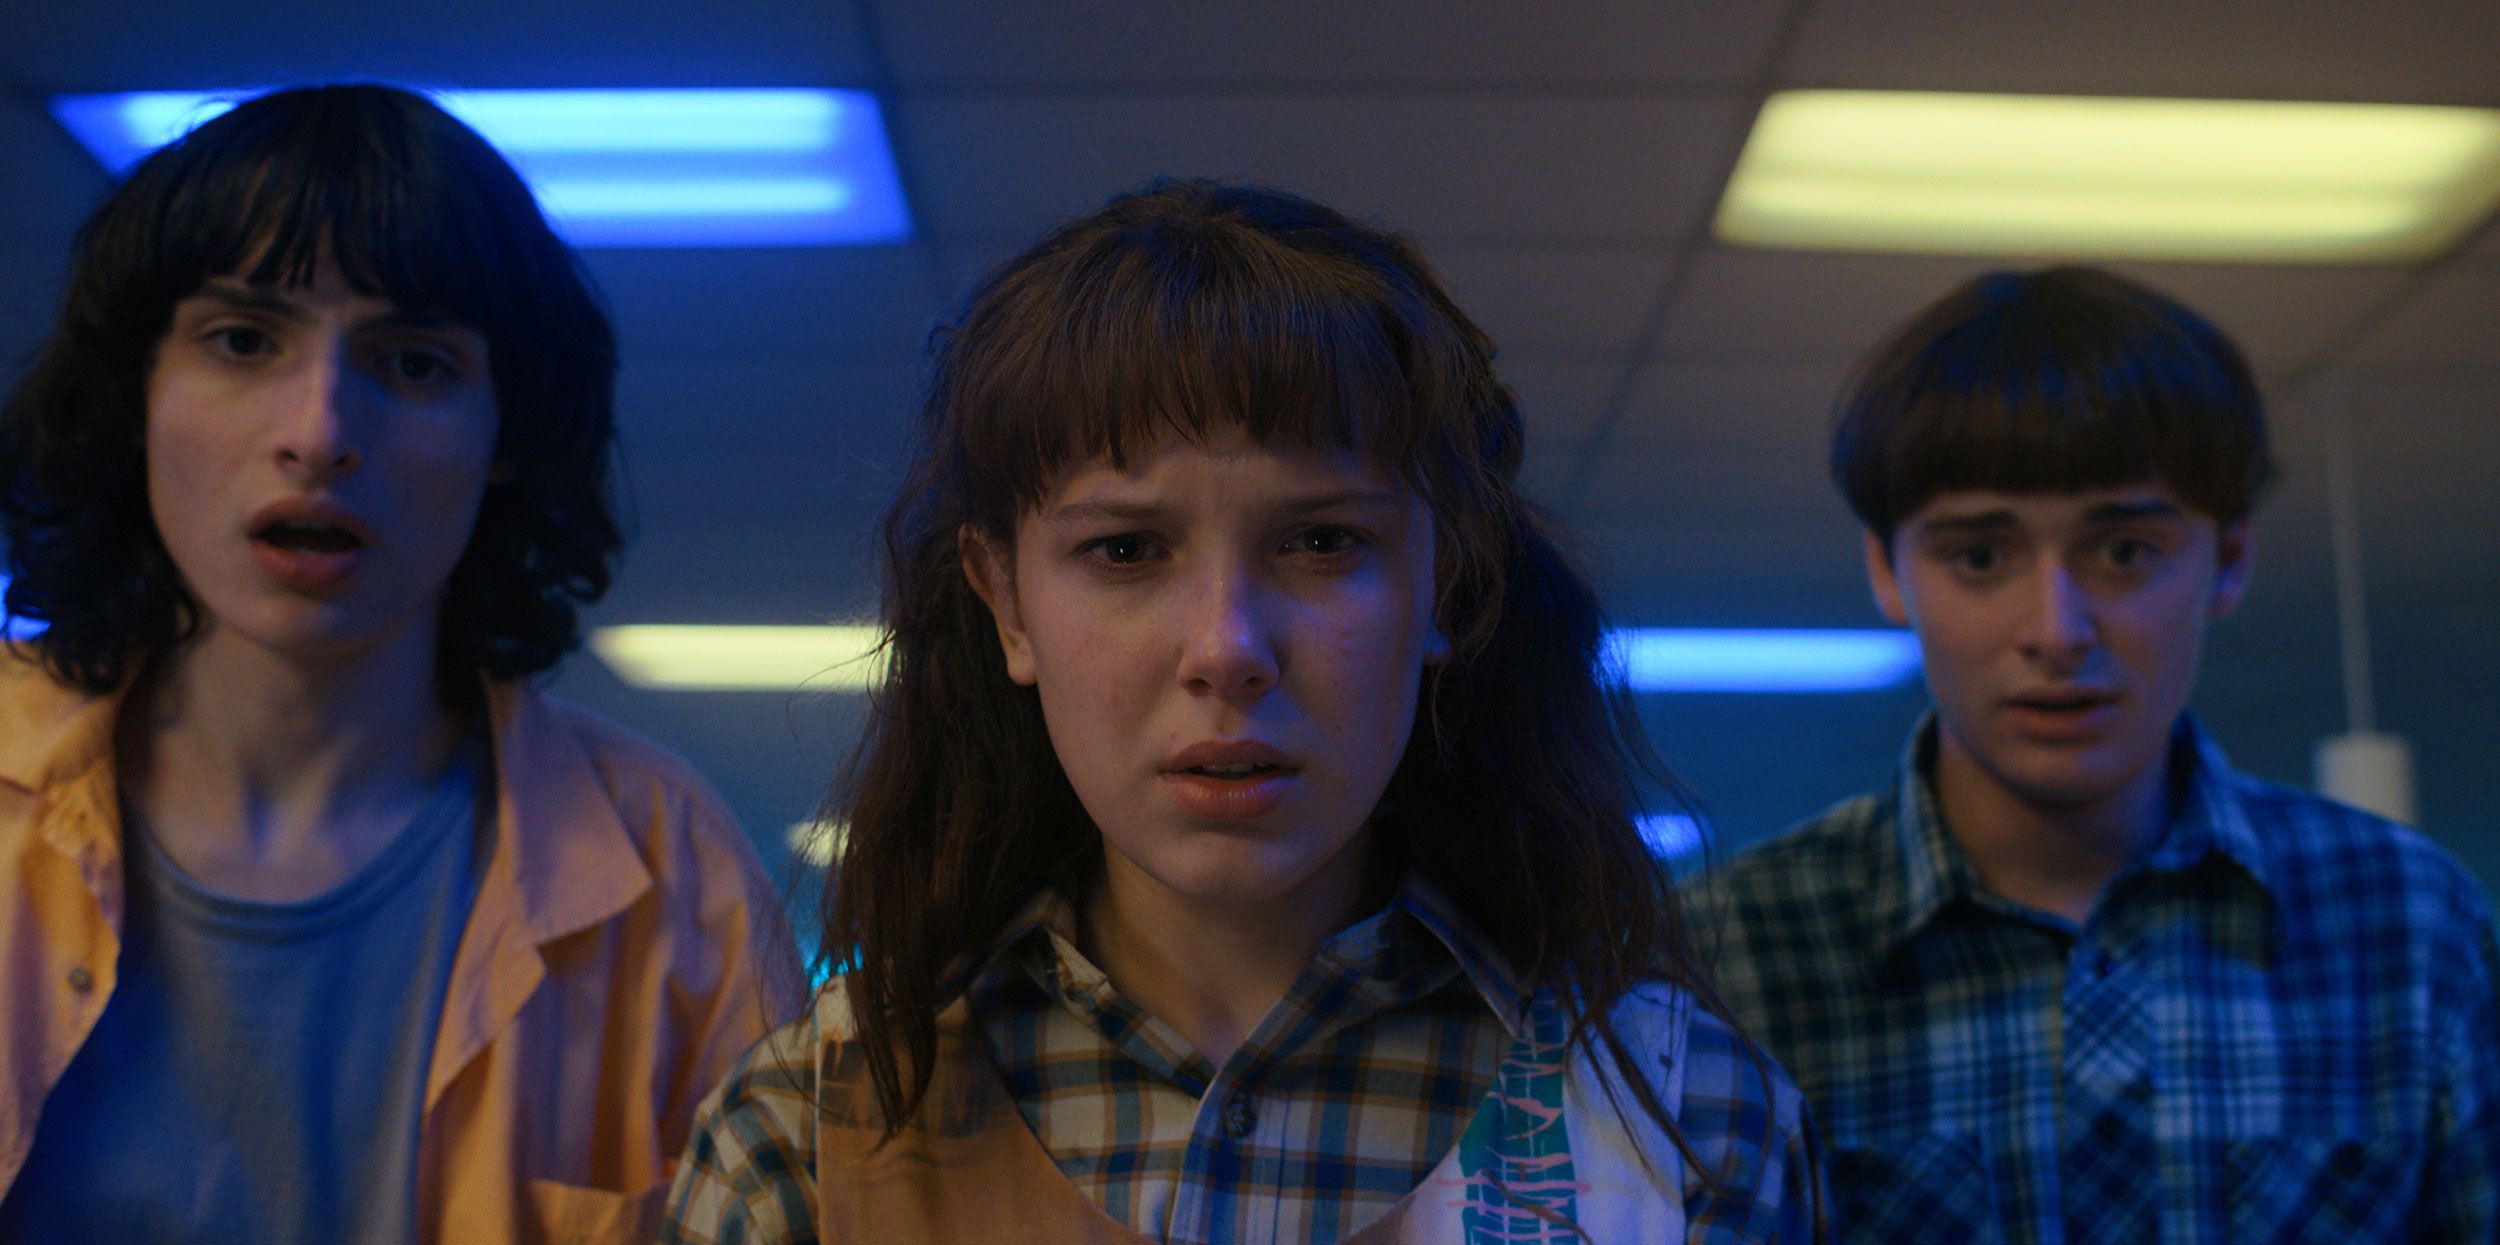 Stranger Things' Review: Netflix Hit Loses Some Underdog Charm